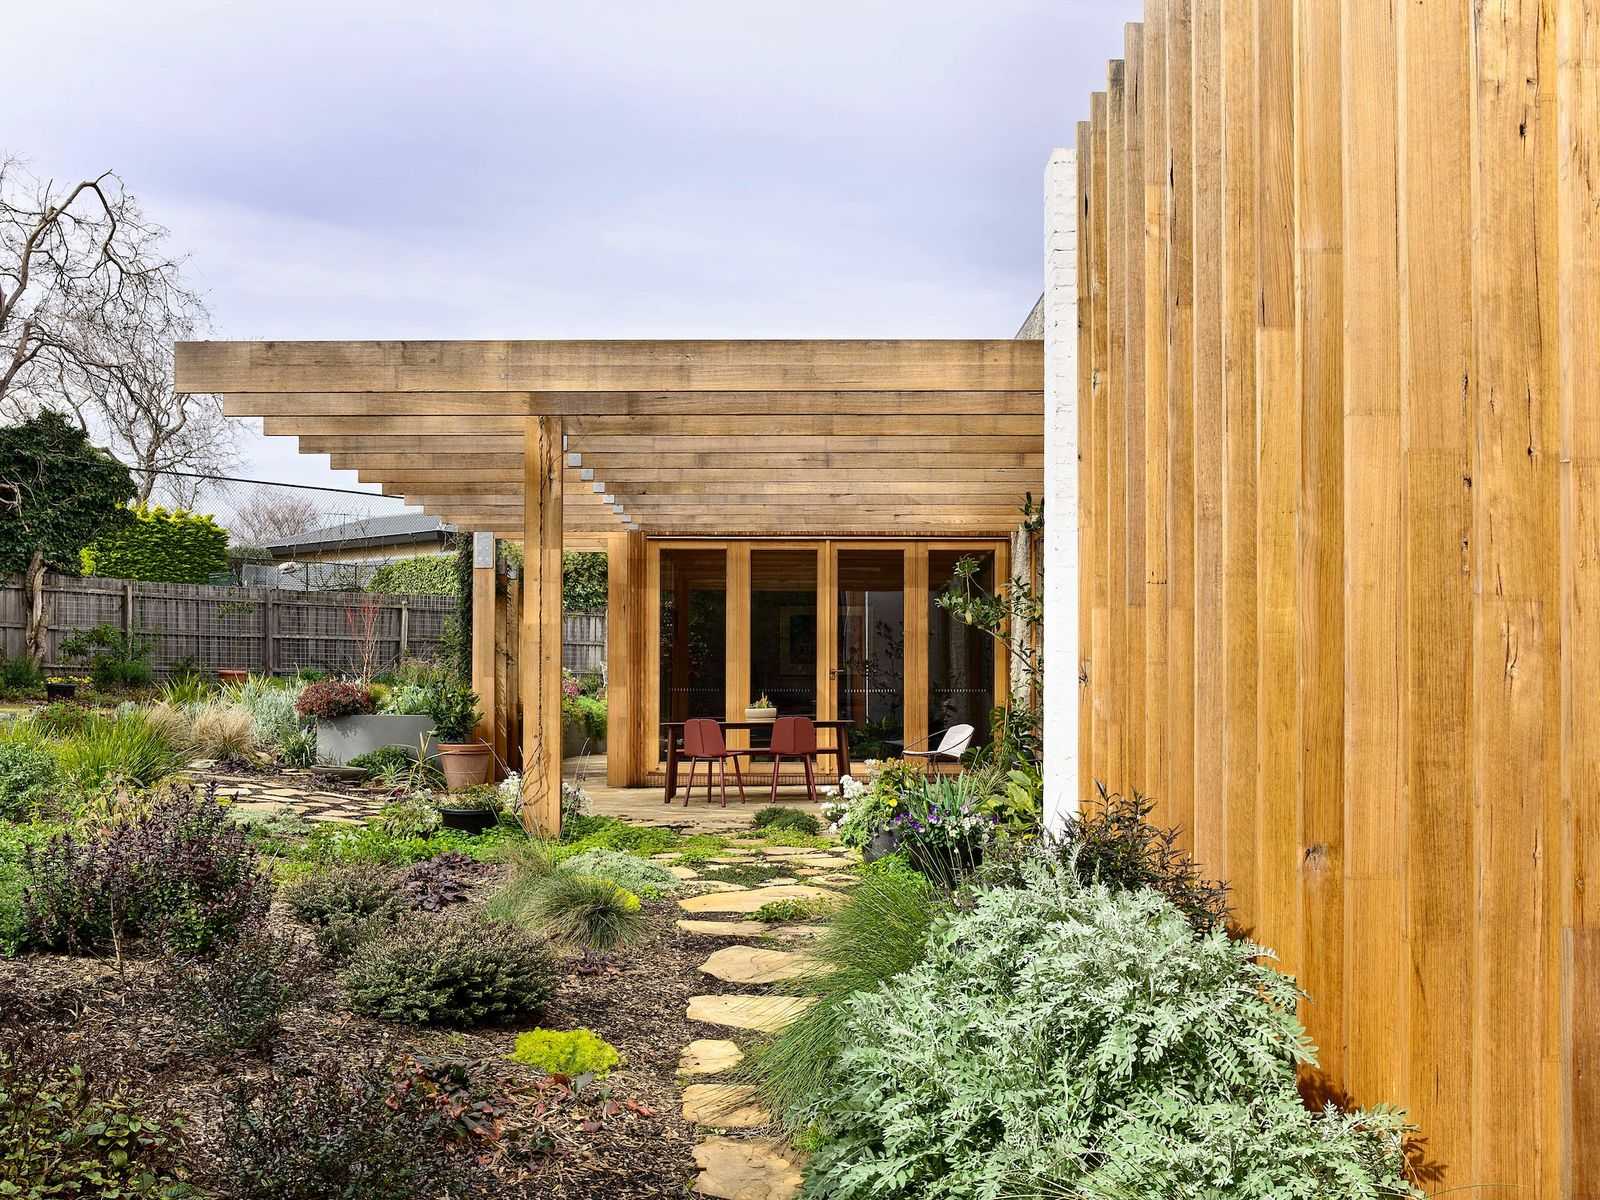 Local House by Zen Architects showing native garden design with outdoor courtyard area